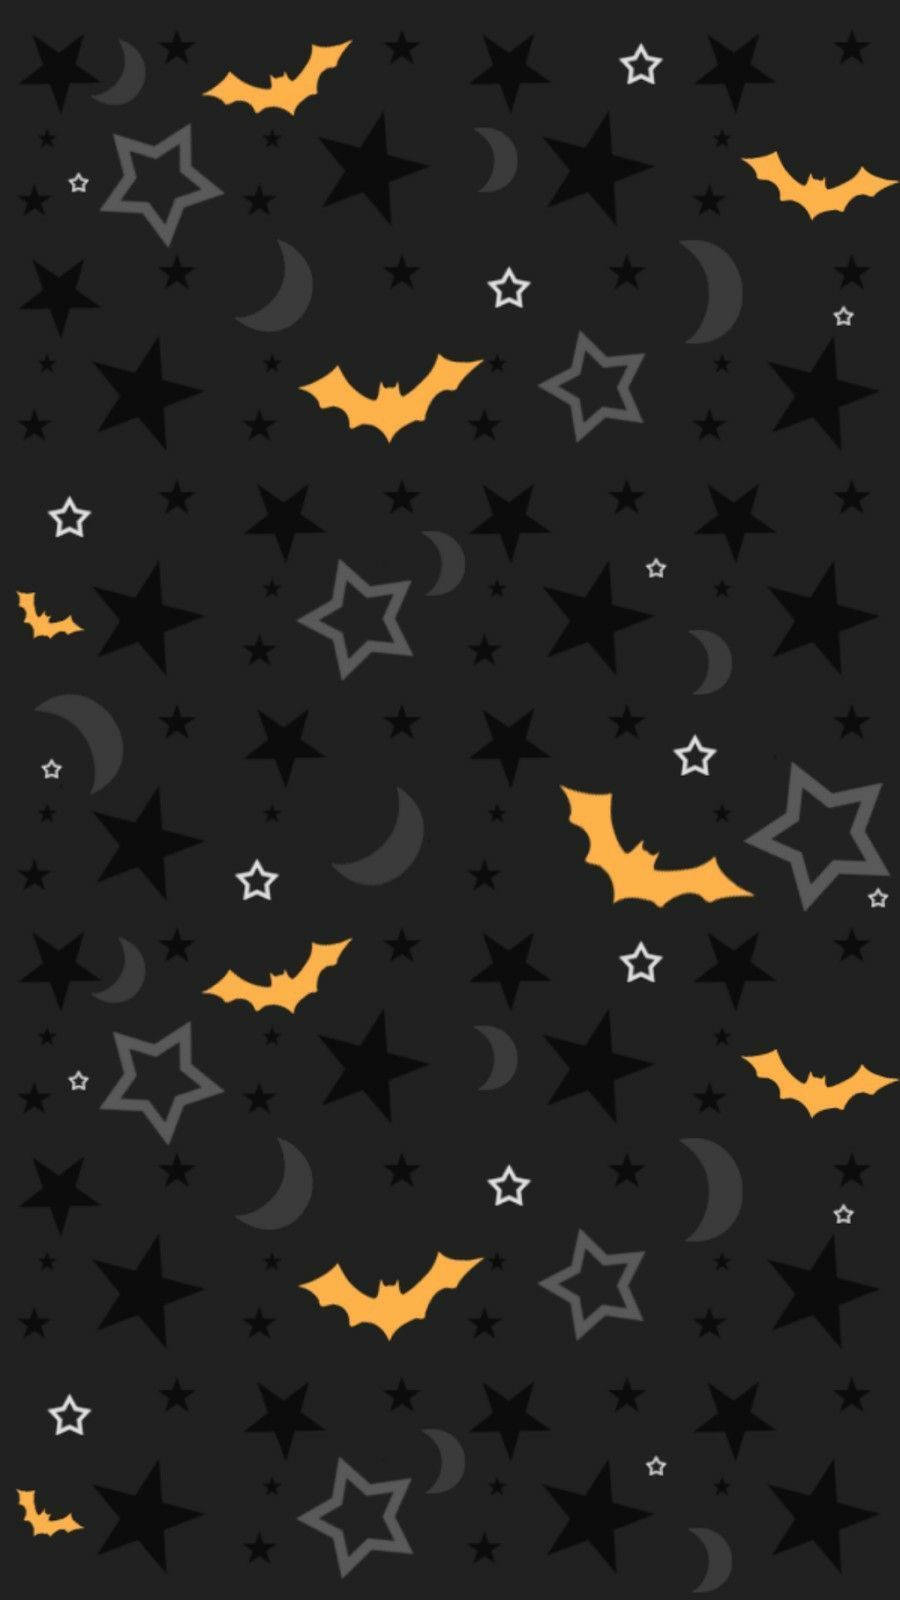 Keep your Halloween spirits alive with a festive iPad Wallpaper